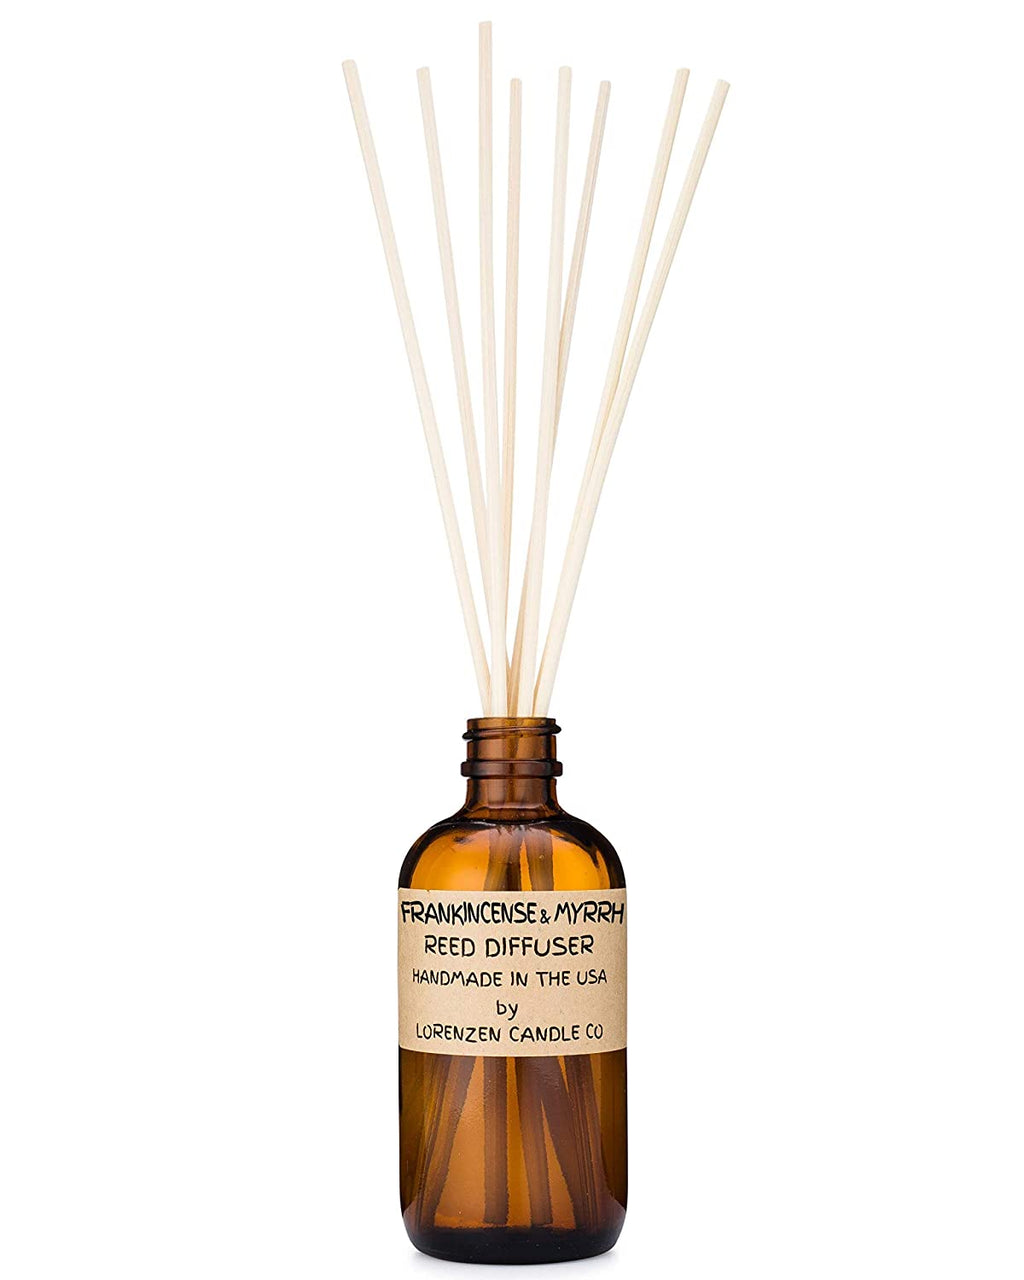 Frankincense & Myrrh Reed Diffuser Set 3oz | Handmade in the USA by Lorenzen Candle Co